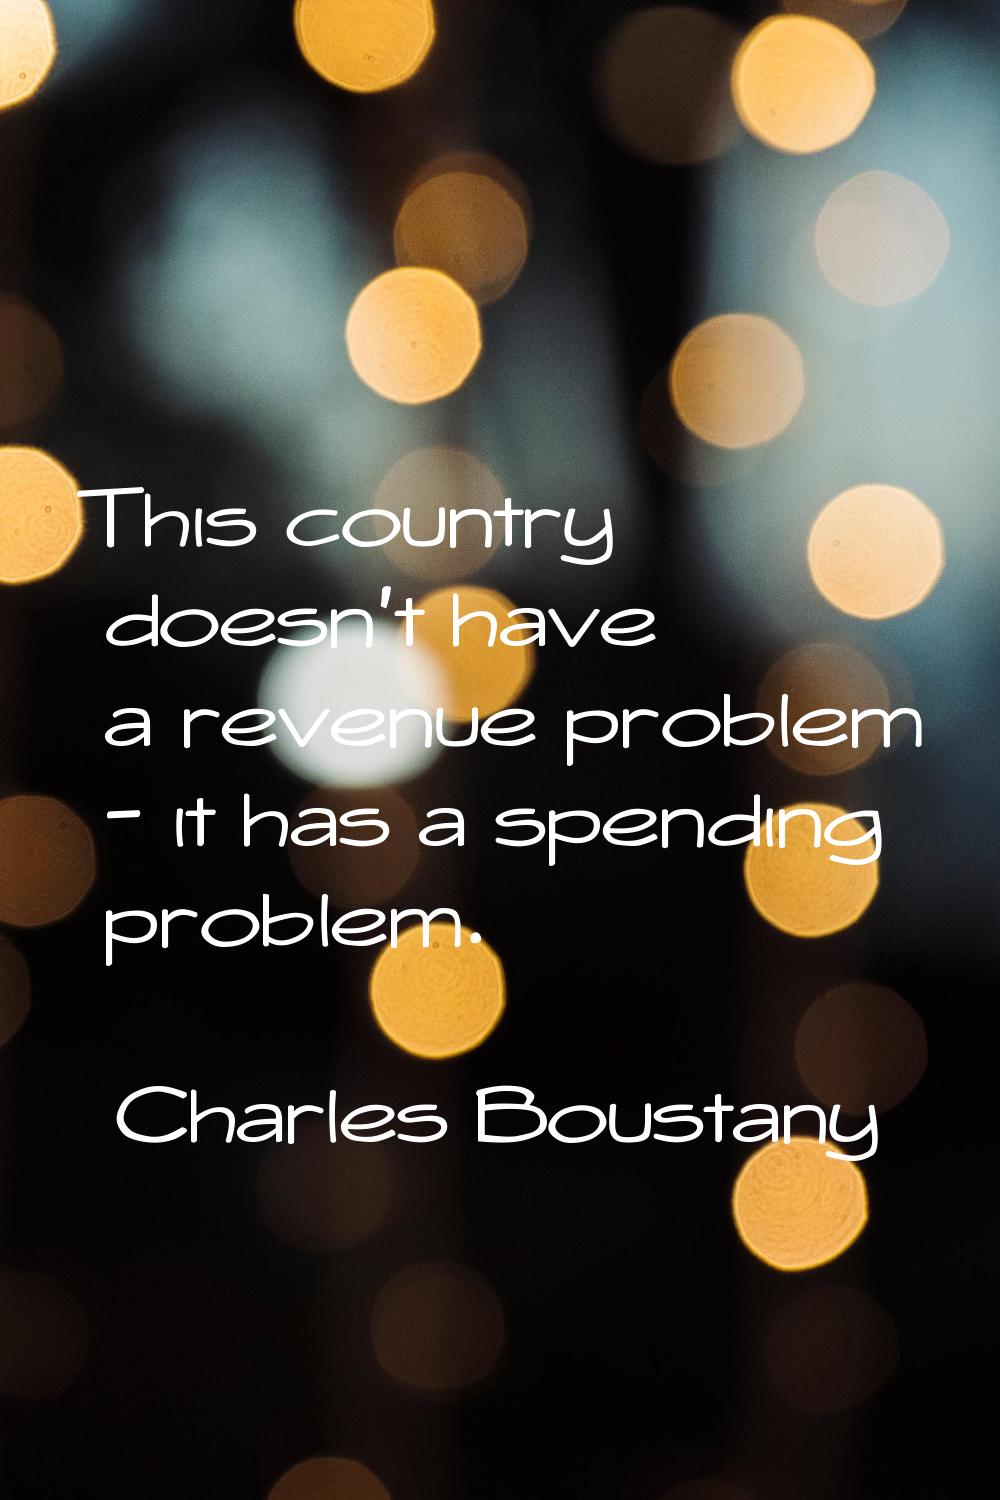 This country doesn't have a revenue problem - it has a spending problem.